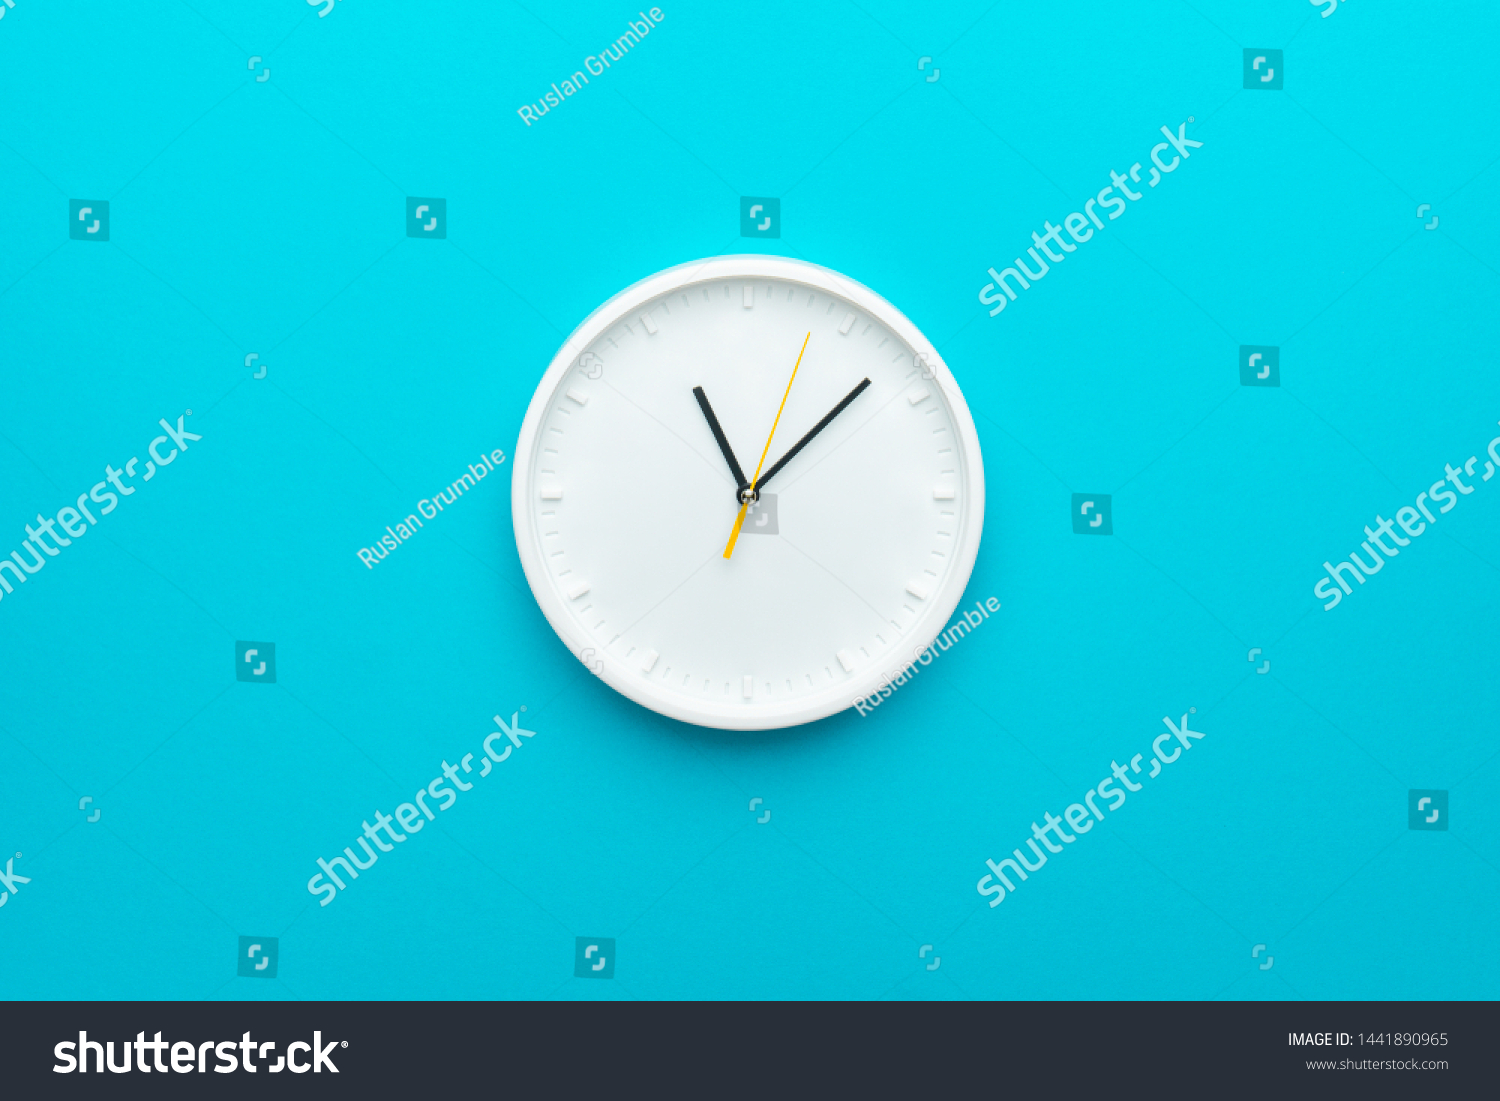 White wall clock with yellow second hand hanging on the wall. Minimalist flat lay image of plastic wall clock over blue turquiose background with copy space and central composition. #1441890965